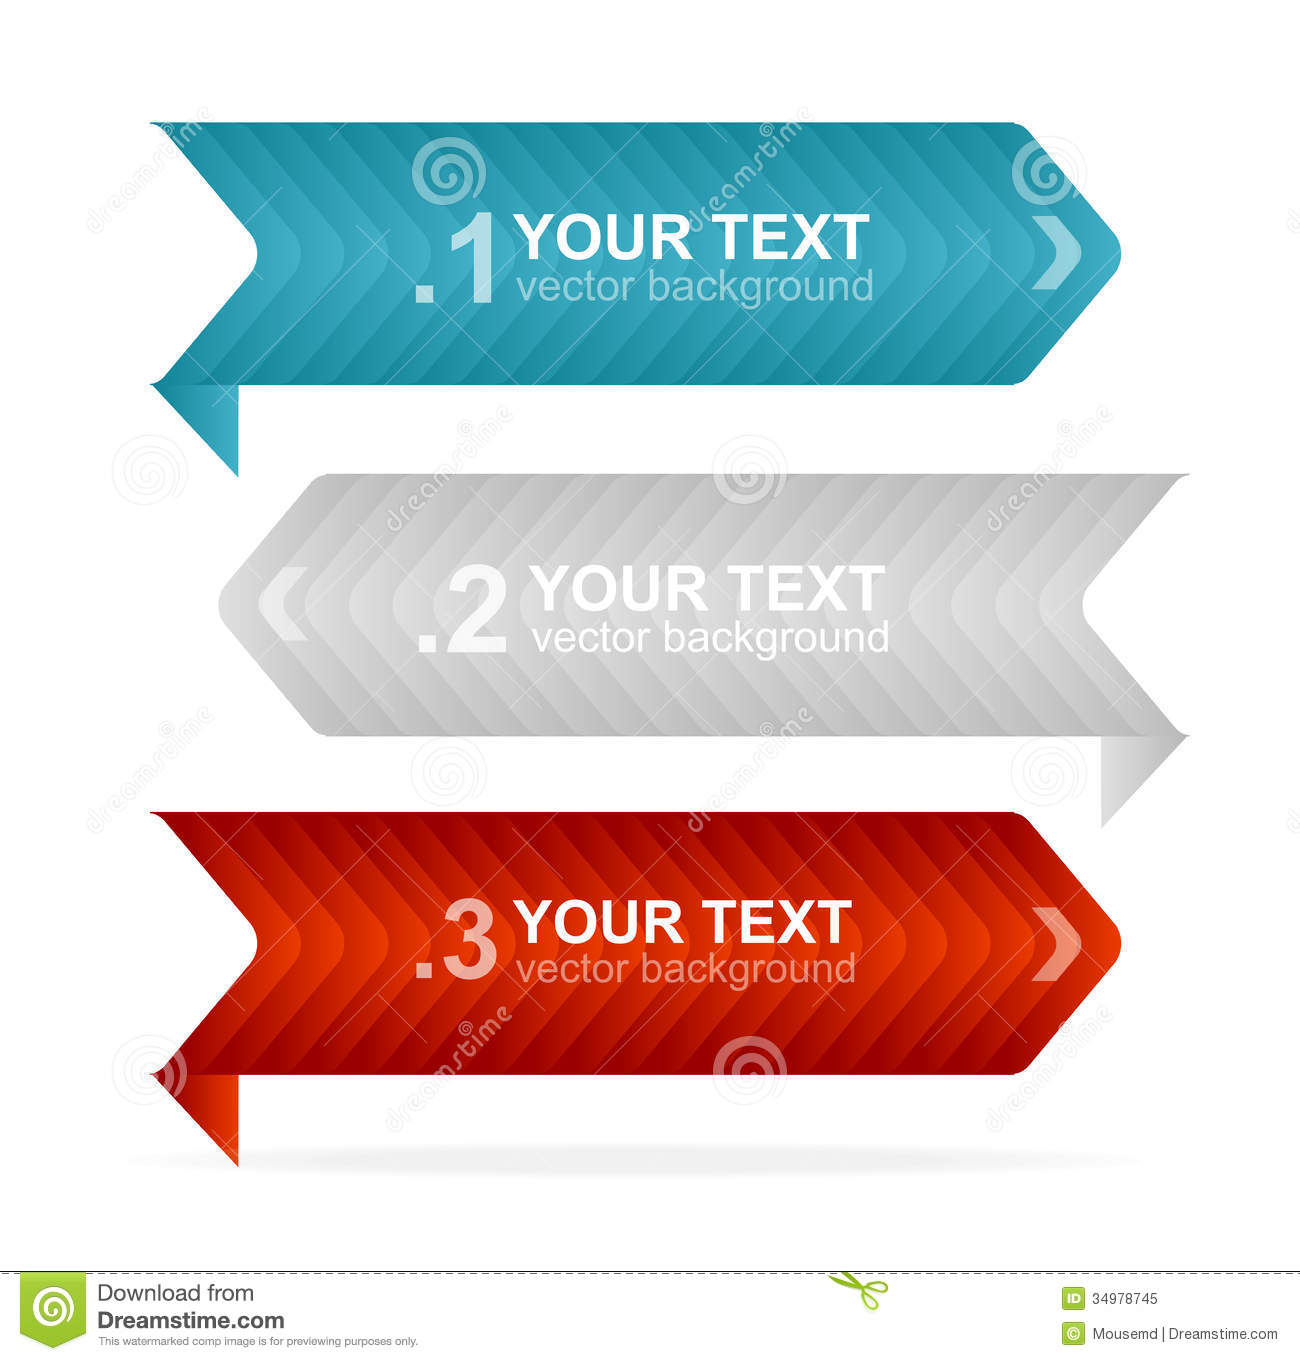 Free Vector Text Boxes